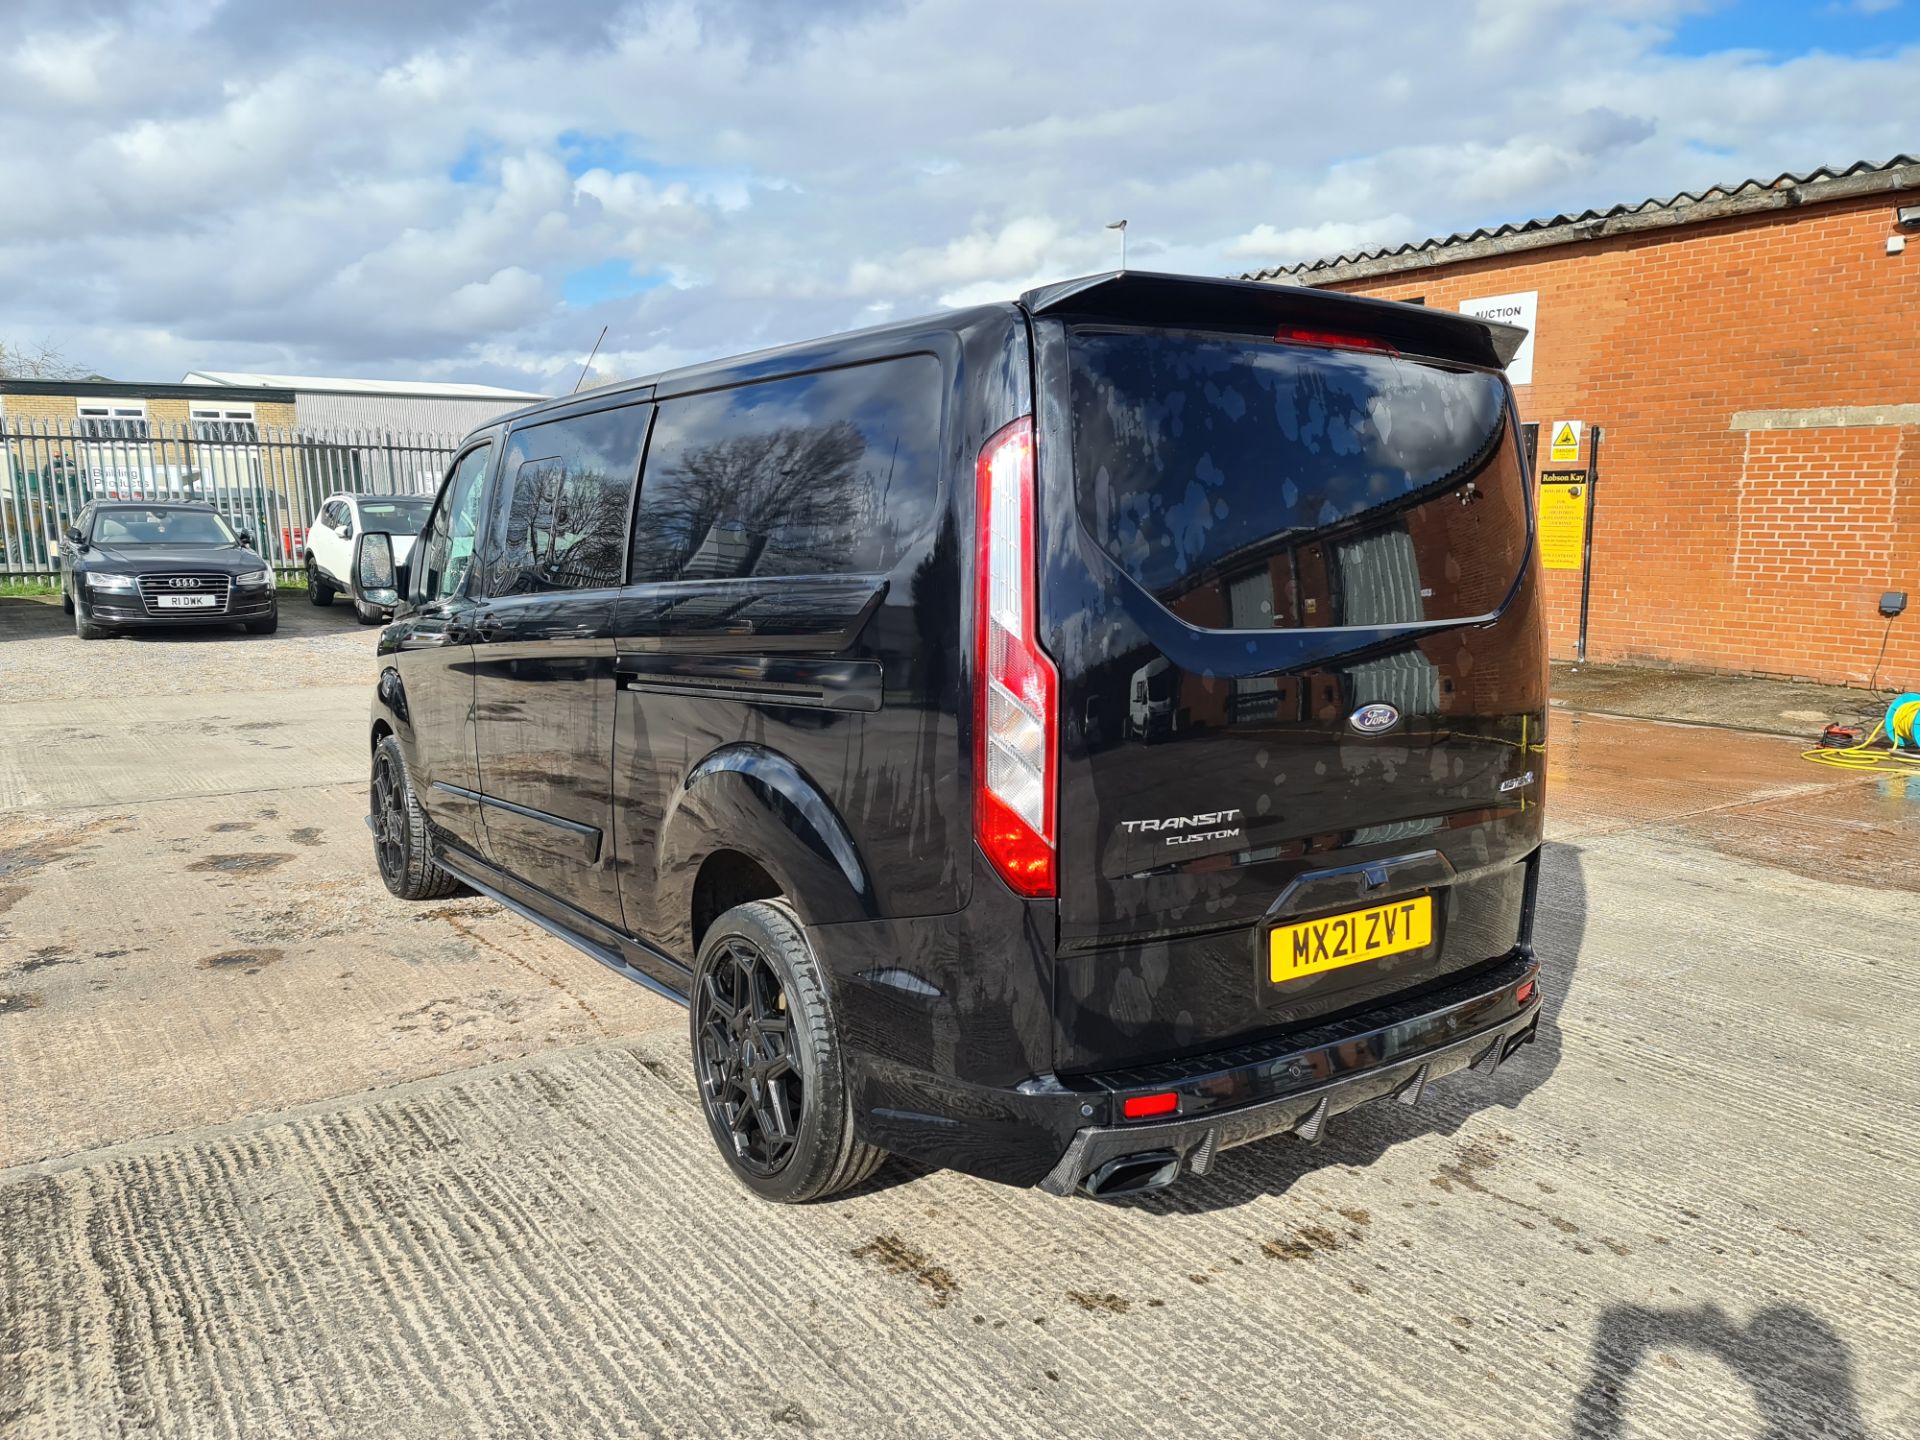 2021 Ford Transit 320LMTD Motion R panel van, auto gearbox, Ultra High Spec - Image 5 of 102